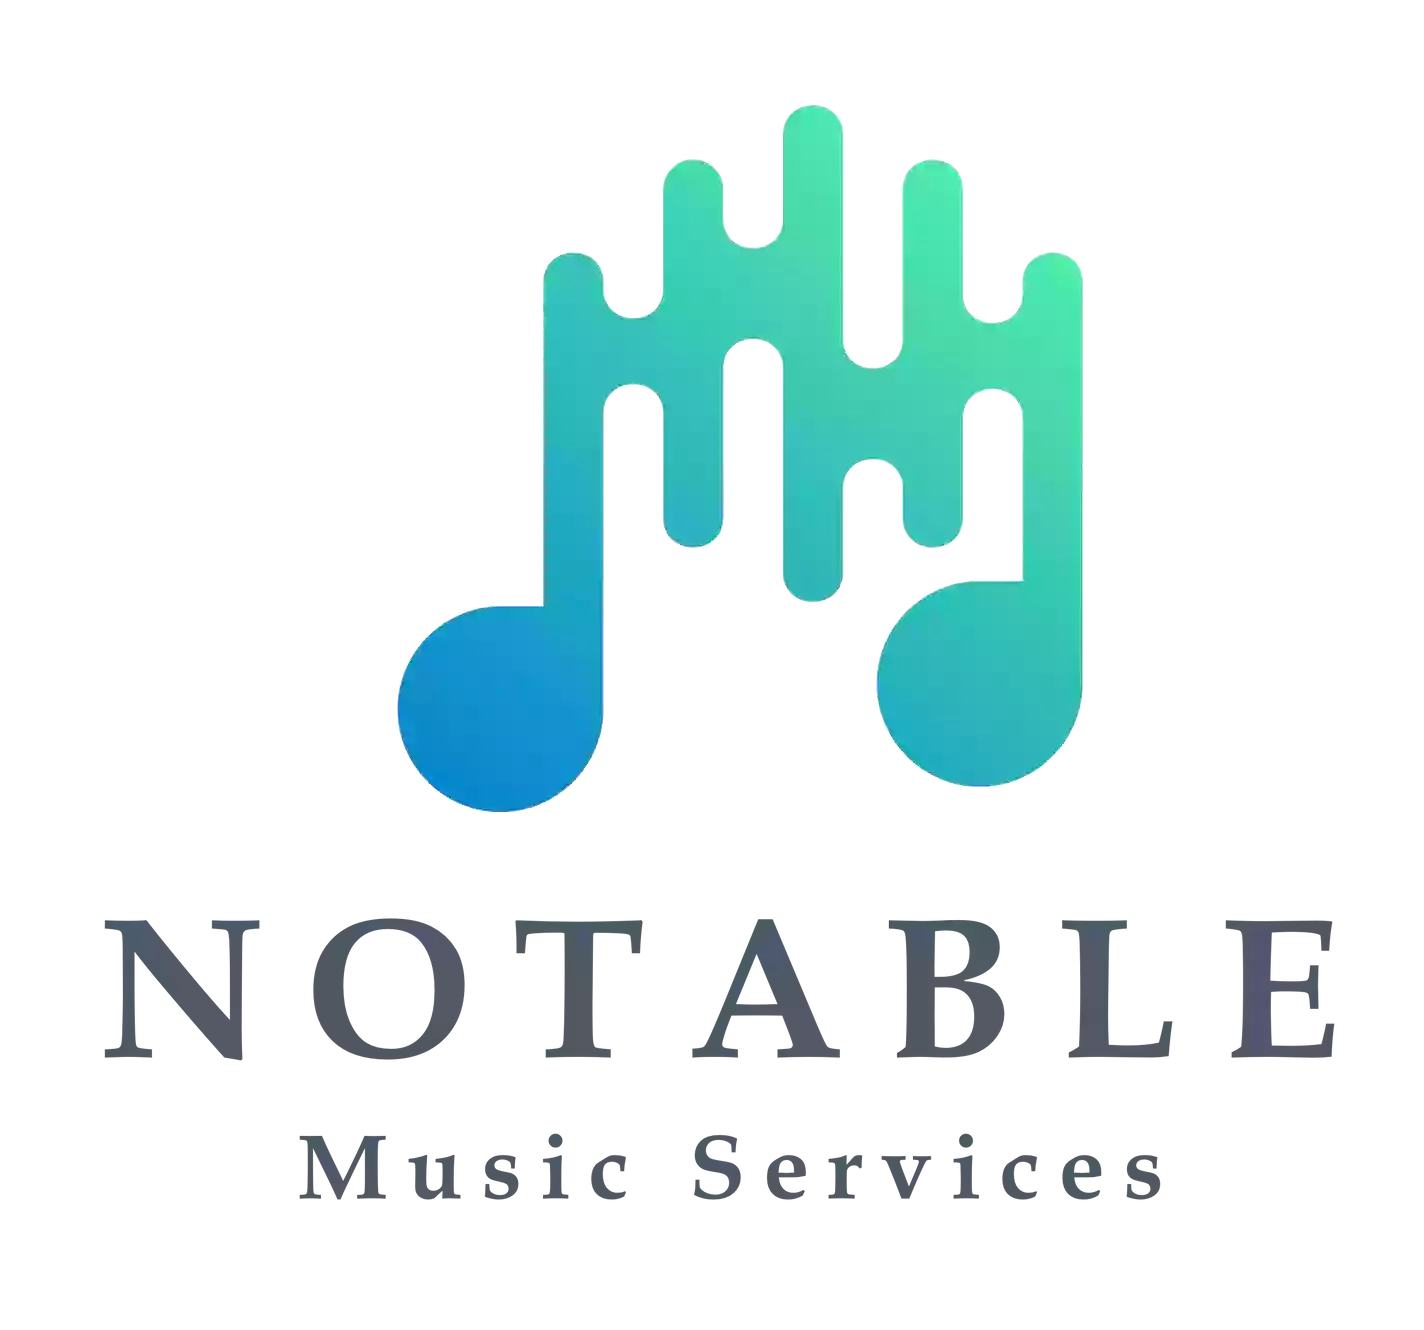 Notable Music Services